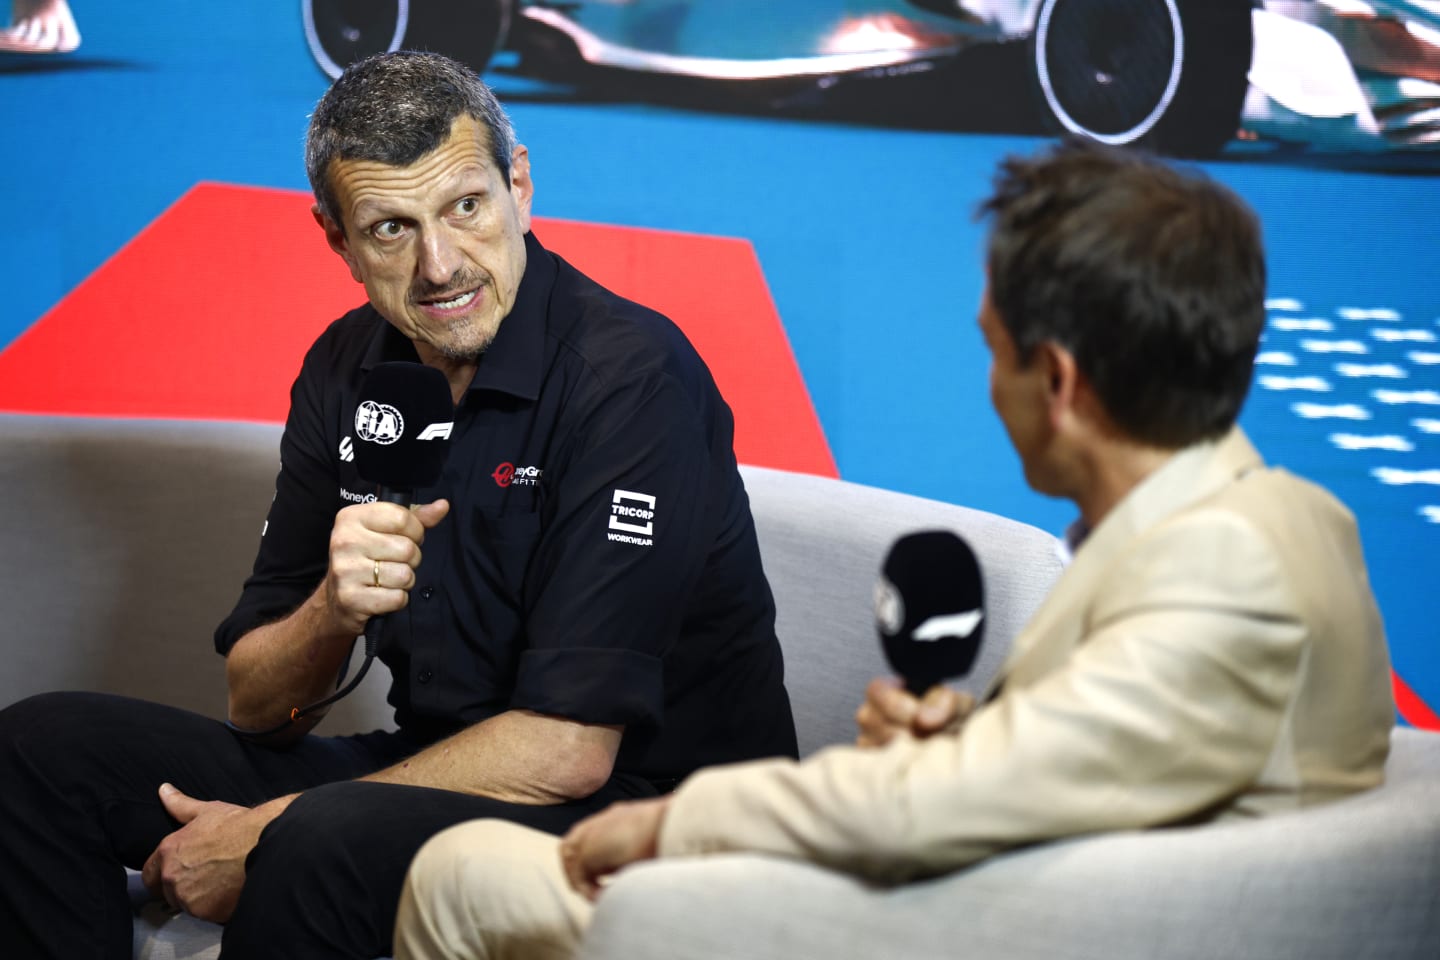 MIAMI, FLORIDA - MAY 05: Haas F1 Team Principal Guenther Steiner attends the Team Principals Press Conference during practice ahead of the F1 Grand Prix of Miami at Miami International Autodrome on May 05, 2023 in Miami, Florida. (Photo by Jared C. Tilton/Getty Images)